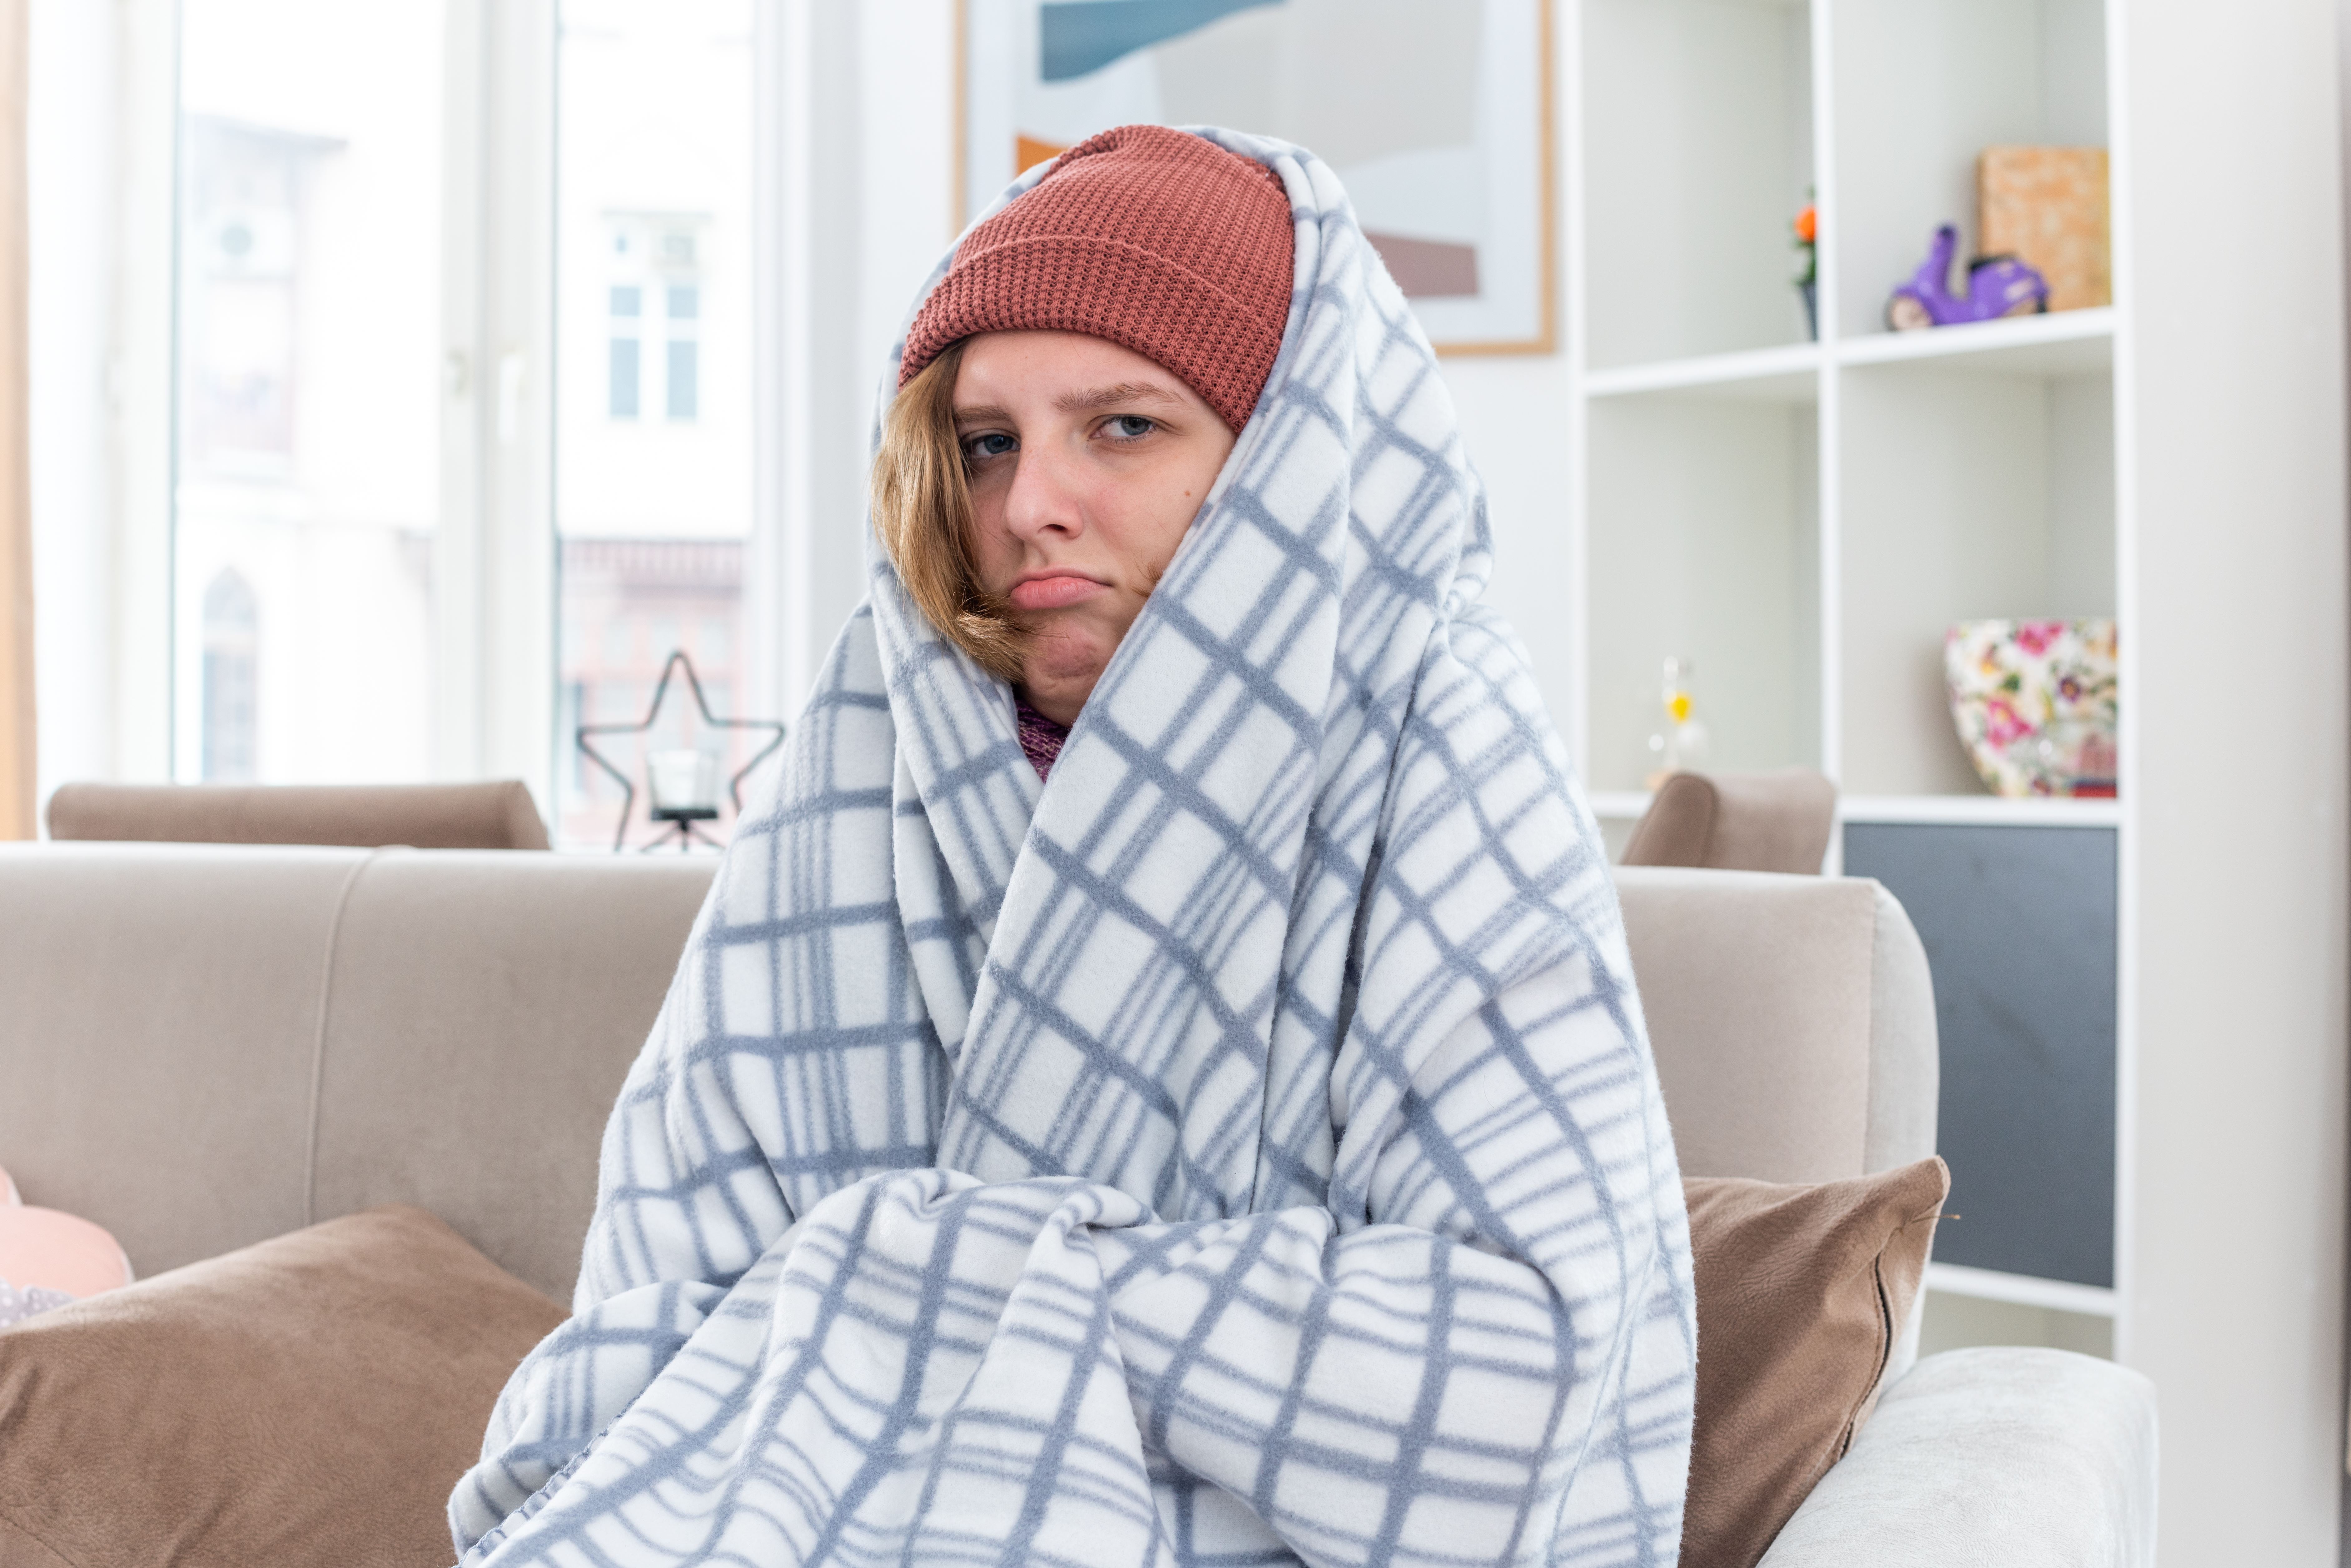 image of a woman wrapped in a blanket